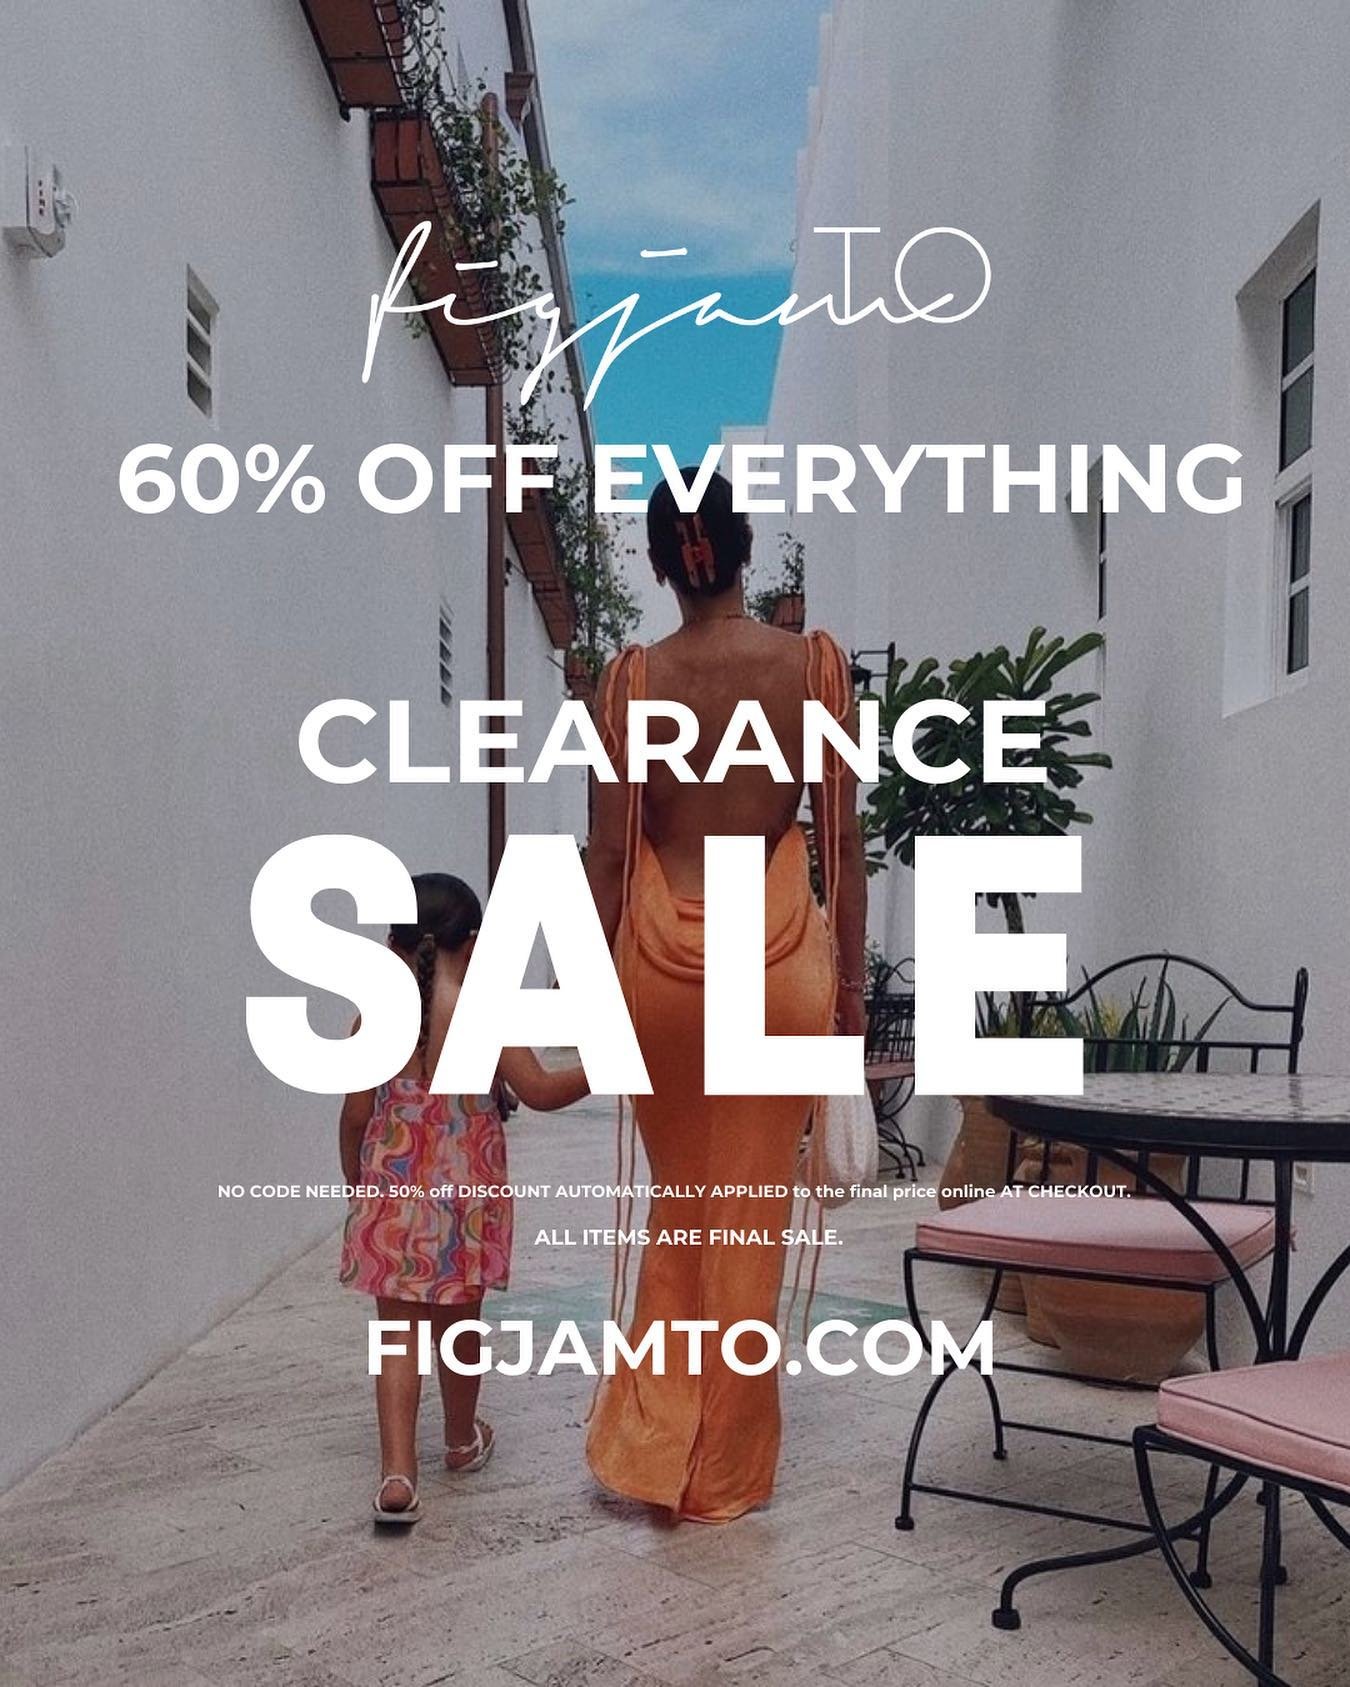 Now 60% OFF EVERYTHING- CLOSING SALE ⚡️Enjoy 60% off all regular priced items &amp; an extra 60% off all our sale items.

No code needed. Discount automatically applied at checkout . All items are final sale. Cannot be combined with any other promos.